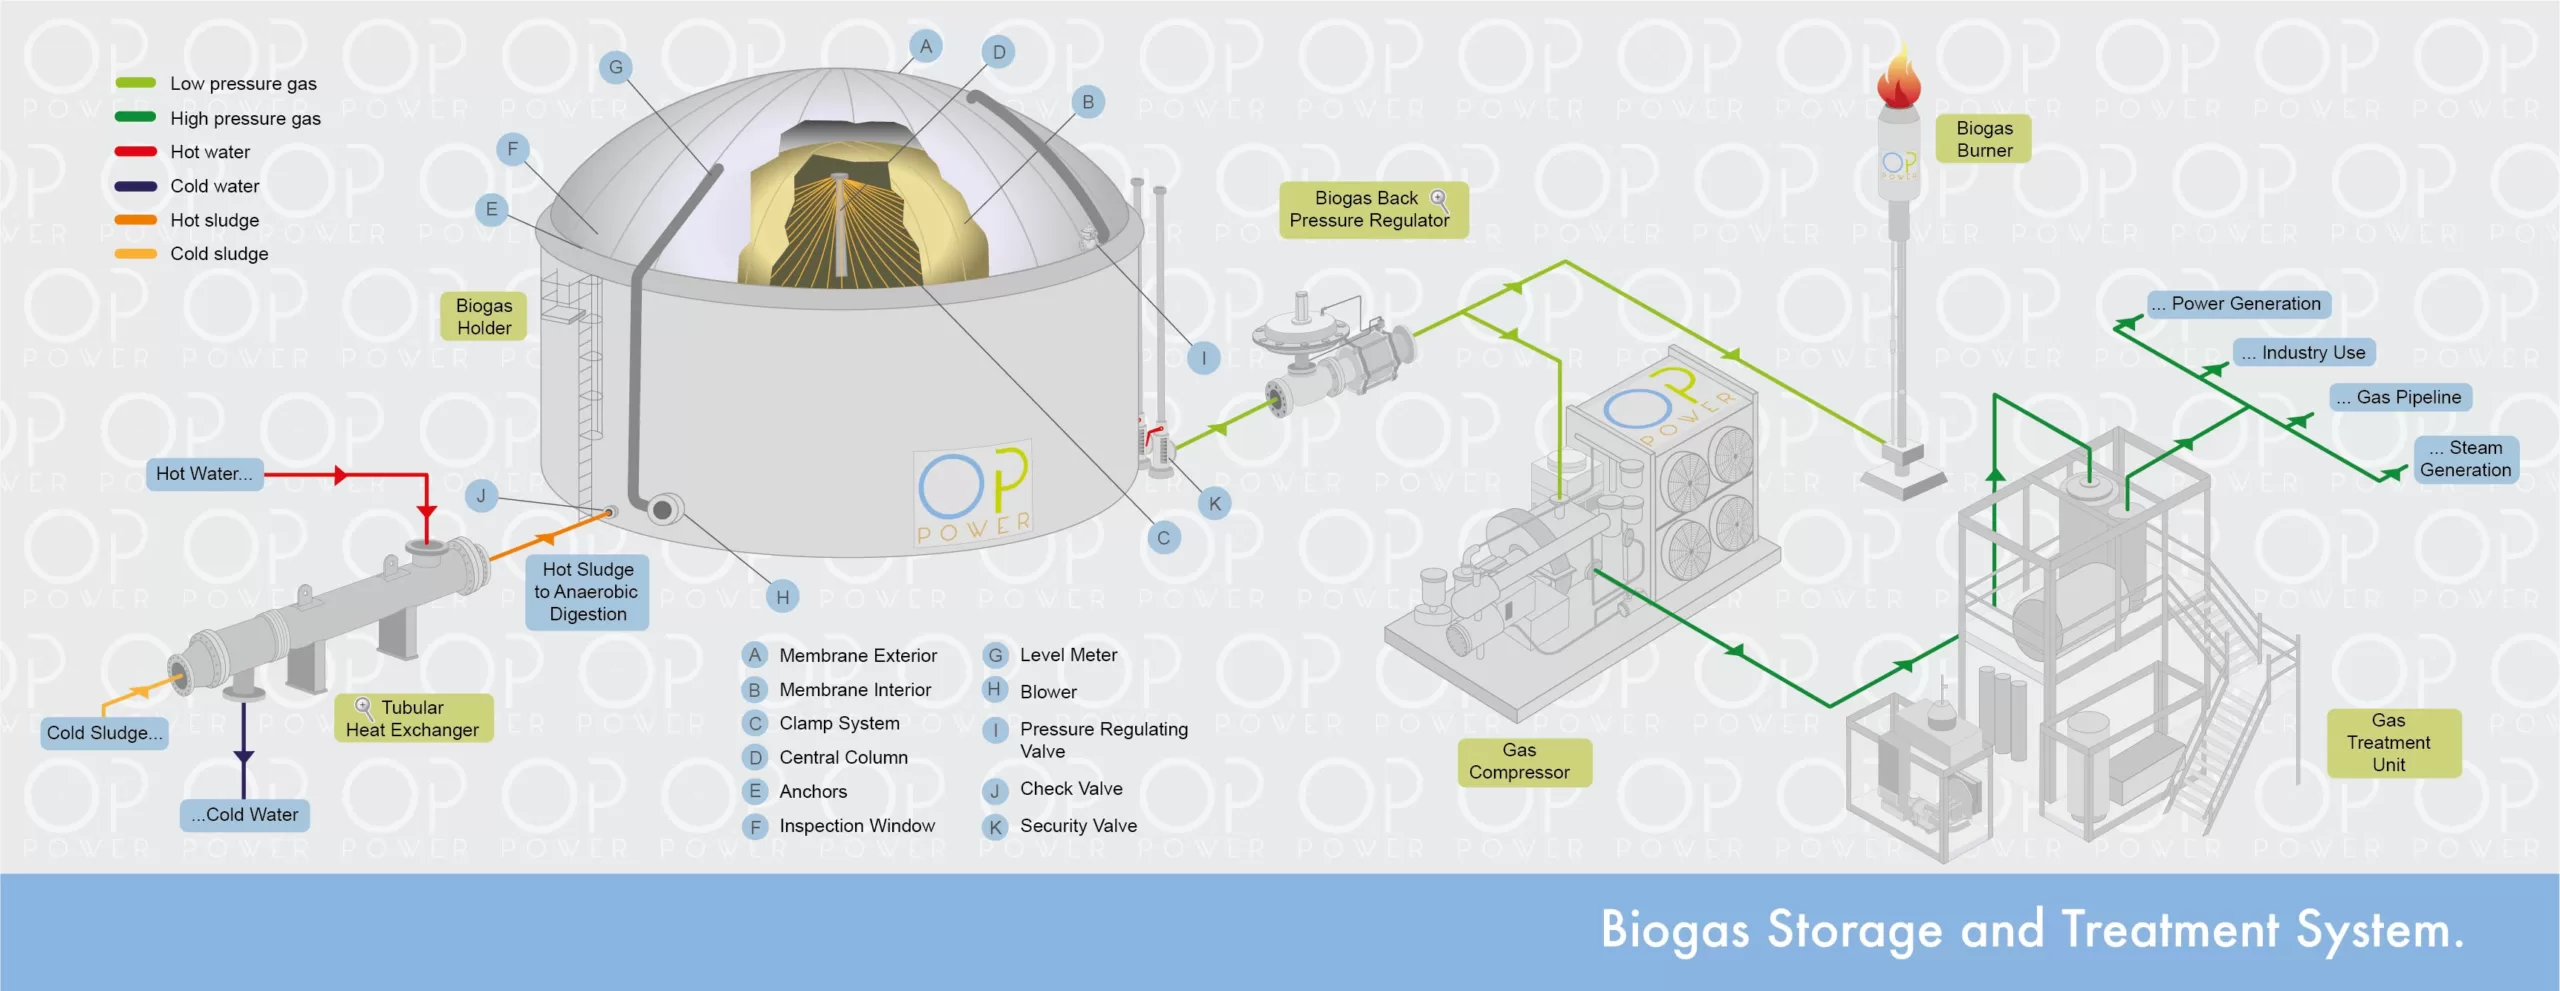 BIOGAS STORAGE AND TREATMENT SYSTEM OP POWER